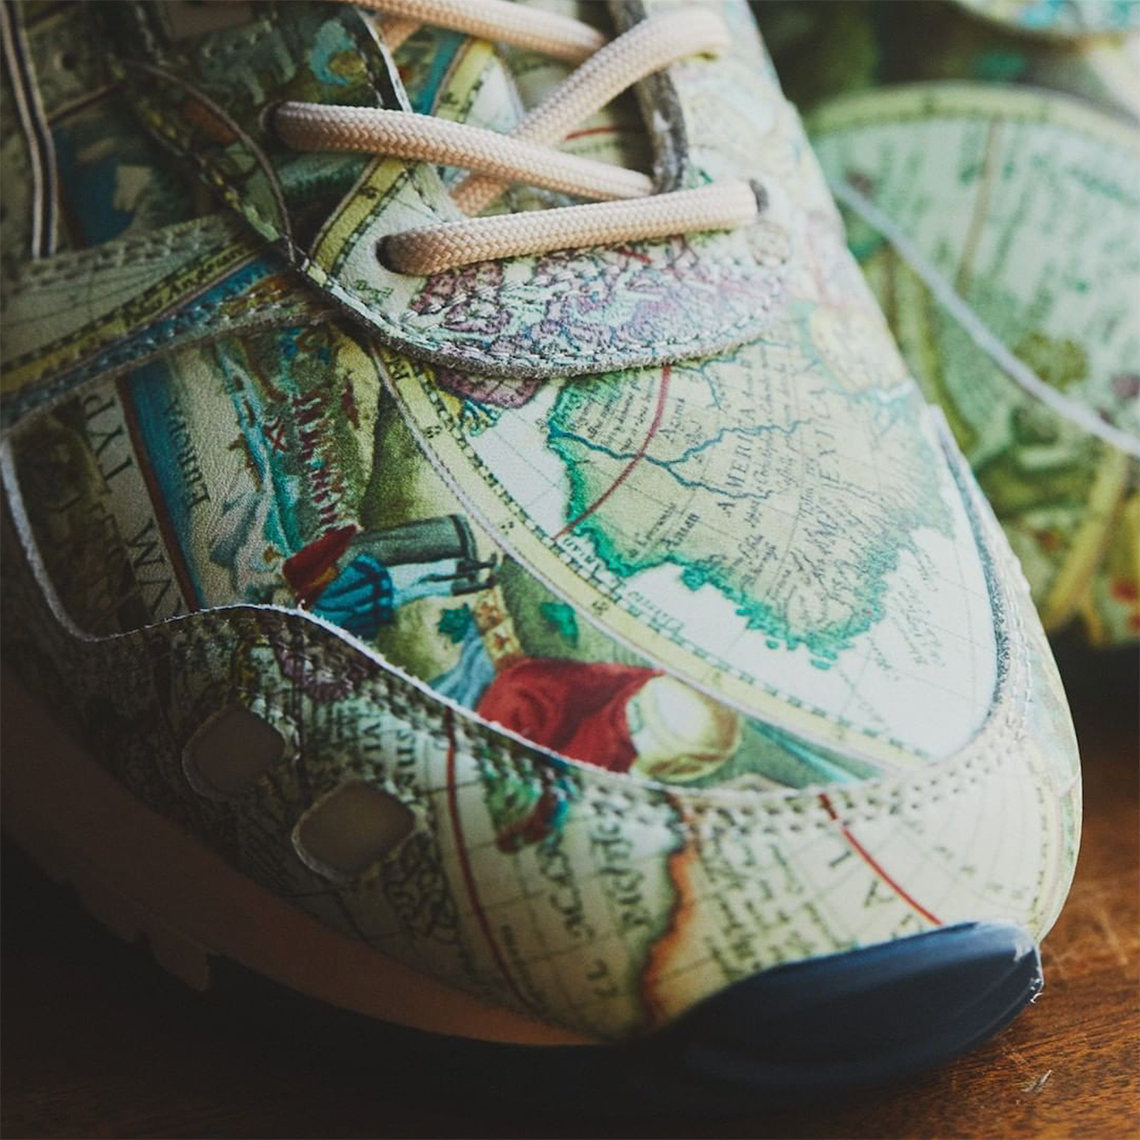 atmos ASICS GEL-LYTE III Aged Map Release Date | SneakerNews.com